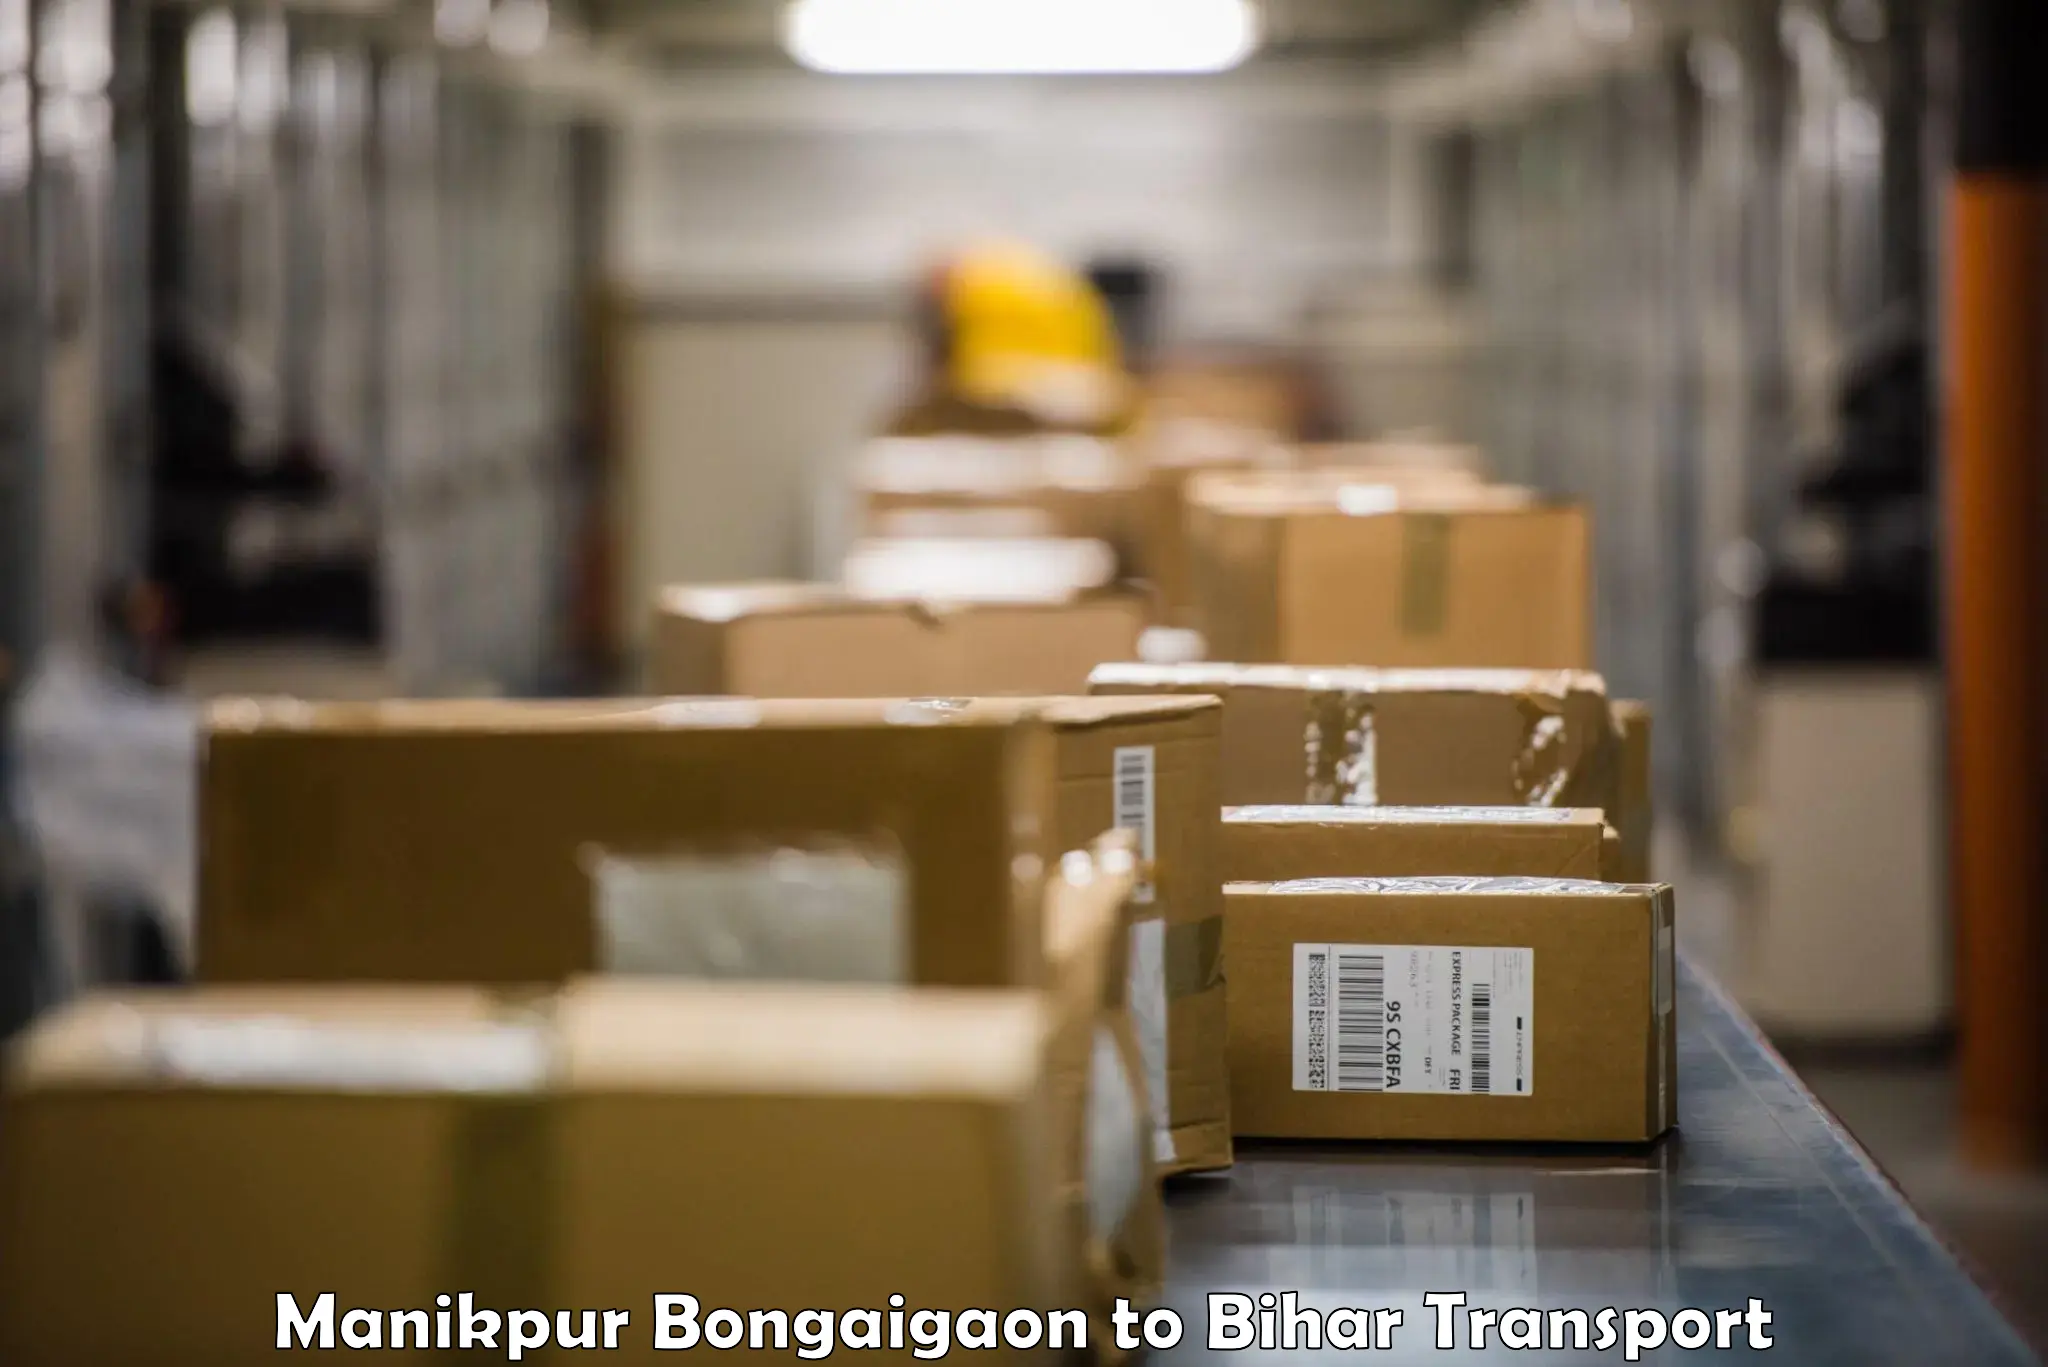 Commercial transport service Manikpur Bongaigaon to East Champaran